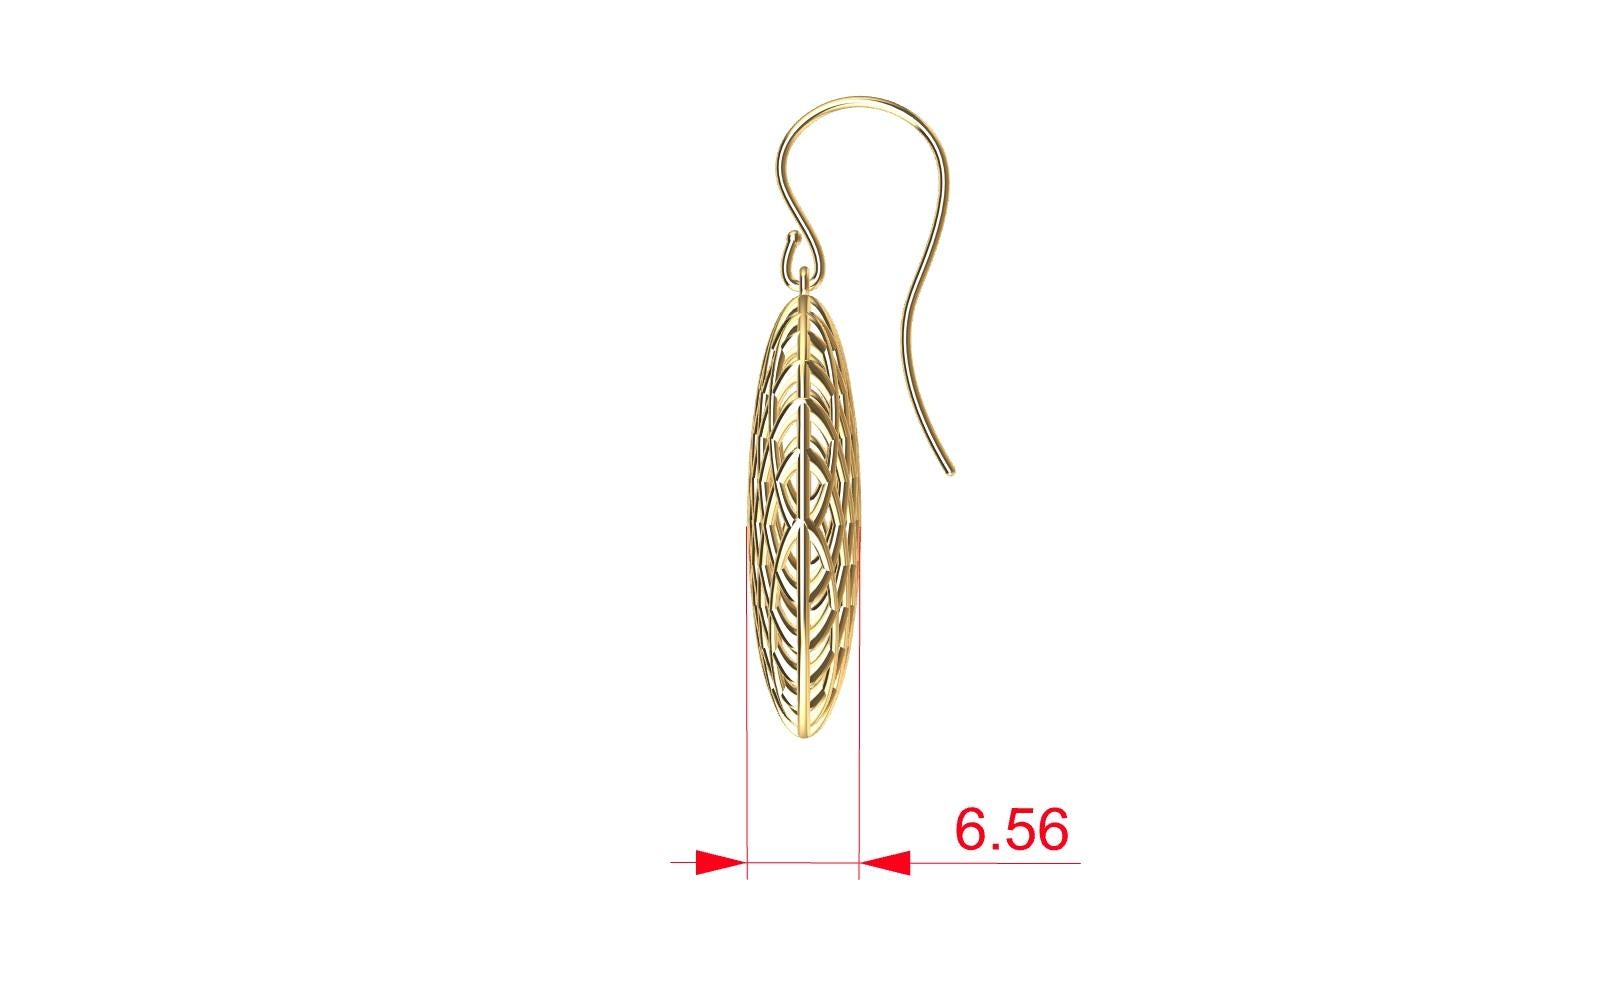 Tiffany designer, Thomas Kurilla created these 18 Karat Yellow Gold Oval Rhombus Earrings.  This is an updated version October 19 , 2022. It is the same design but not 9.7 mm deep, now 6.5 mm. I want to make this accessible without the added weight